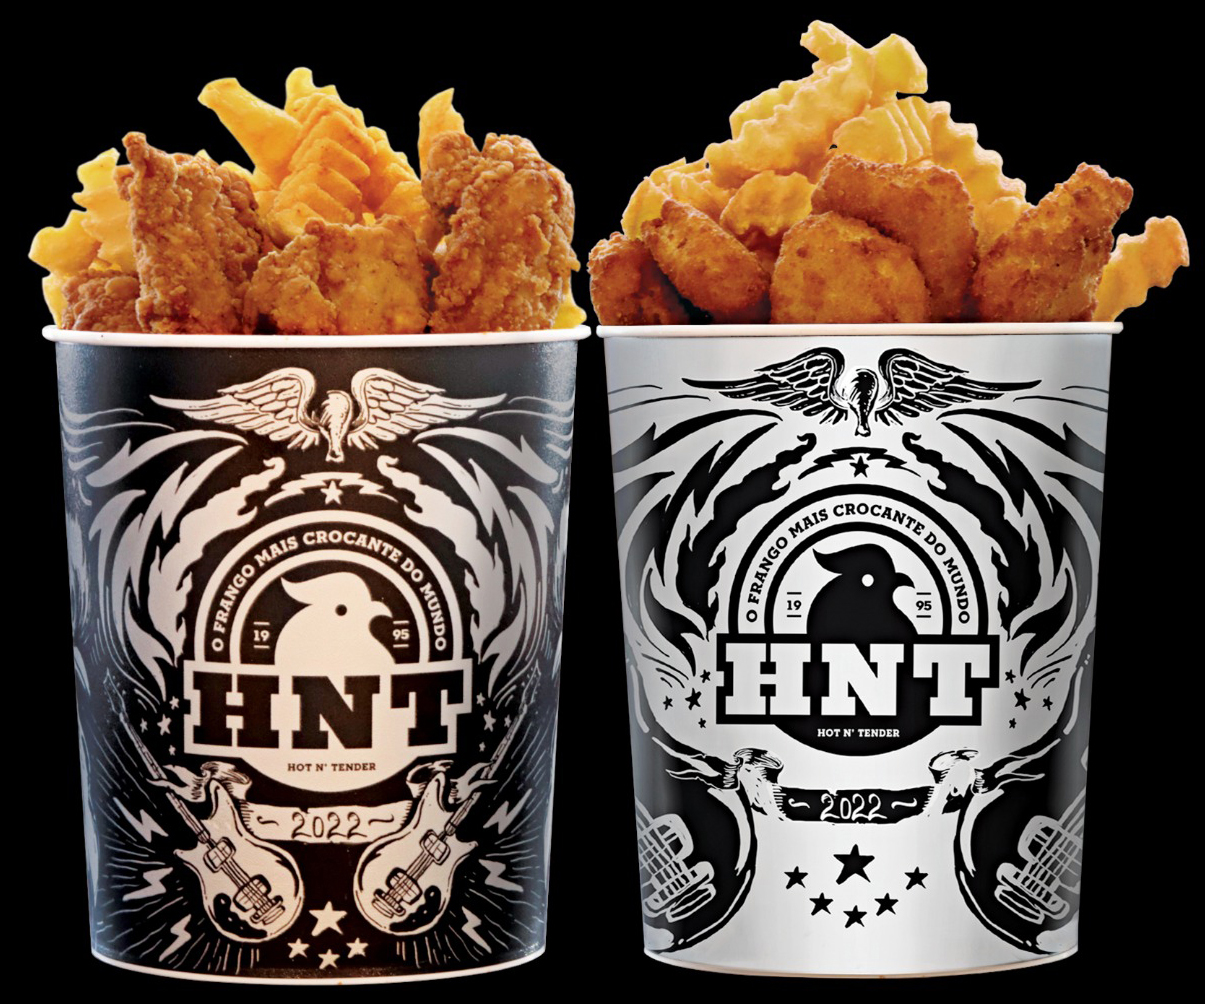 HNT: The fried chicken chain is here with buckets and sandwiches